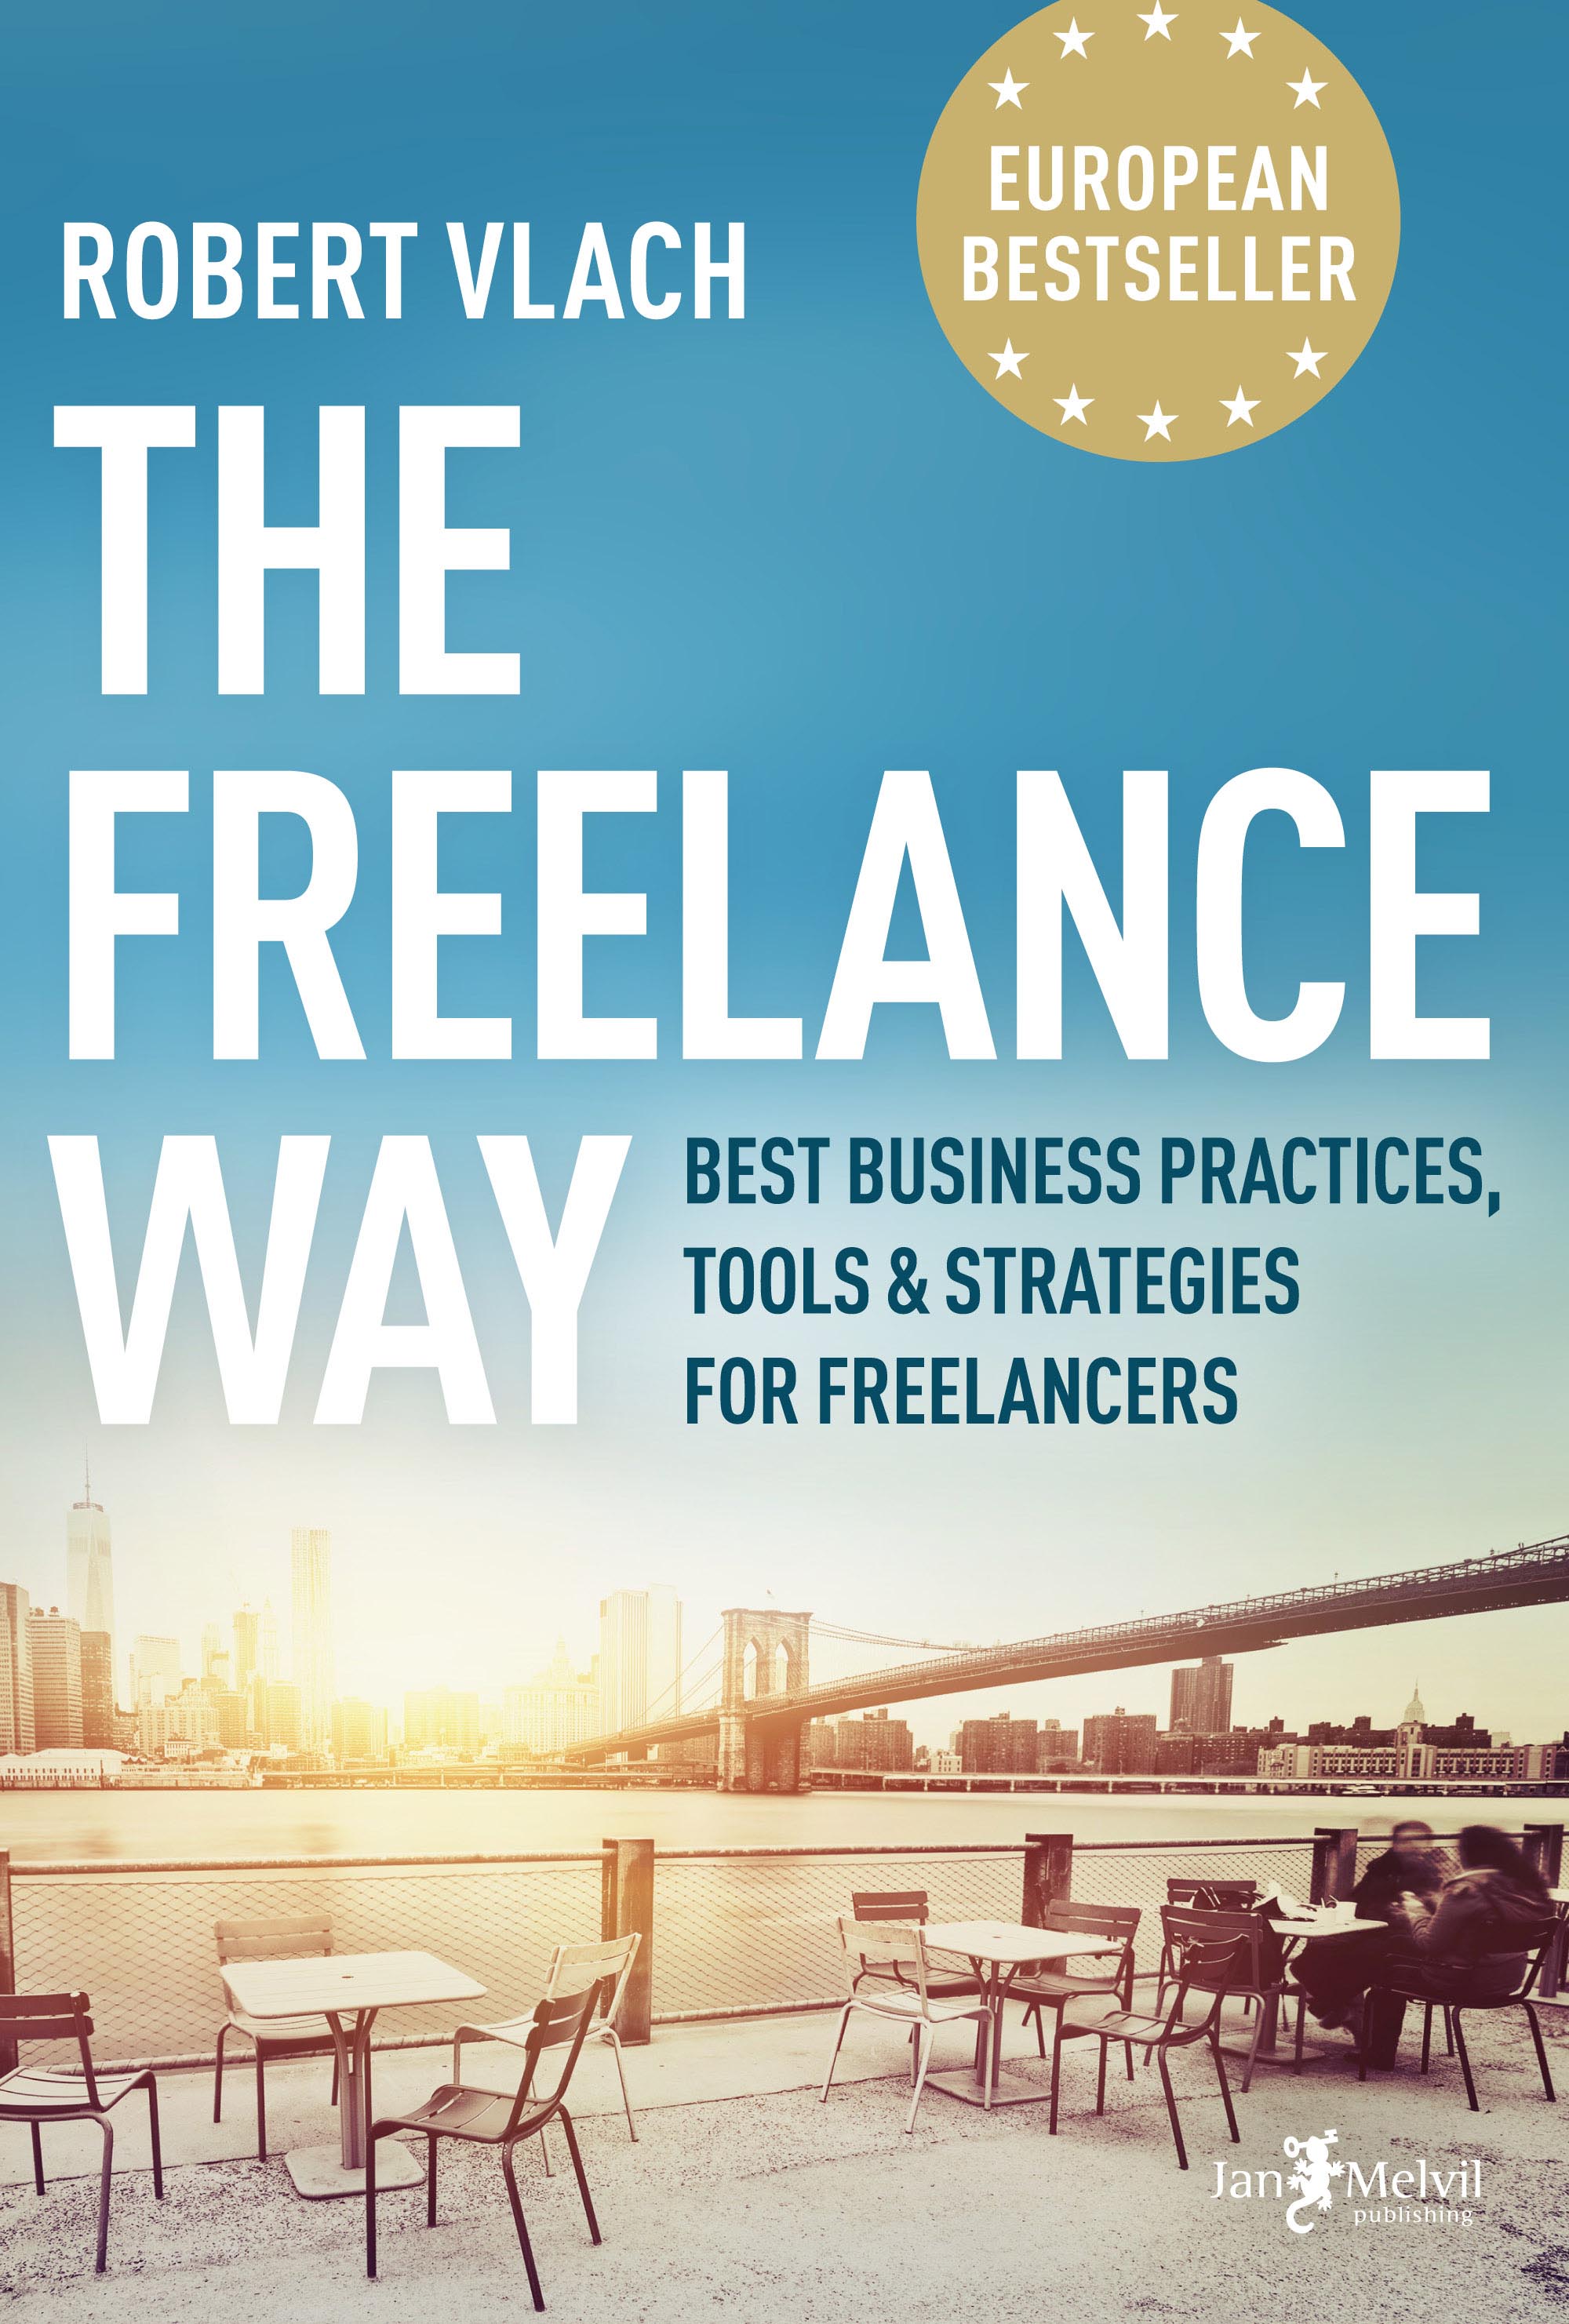 The Freelance Way - Best Business Practices, Tools & Strategies for Freelancers